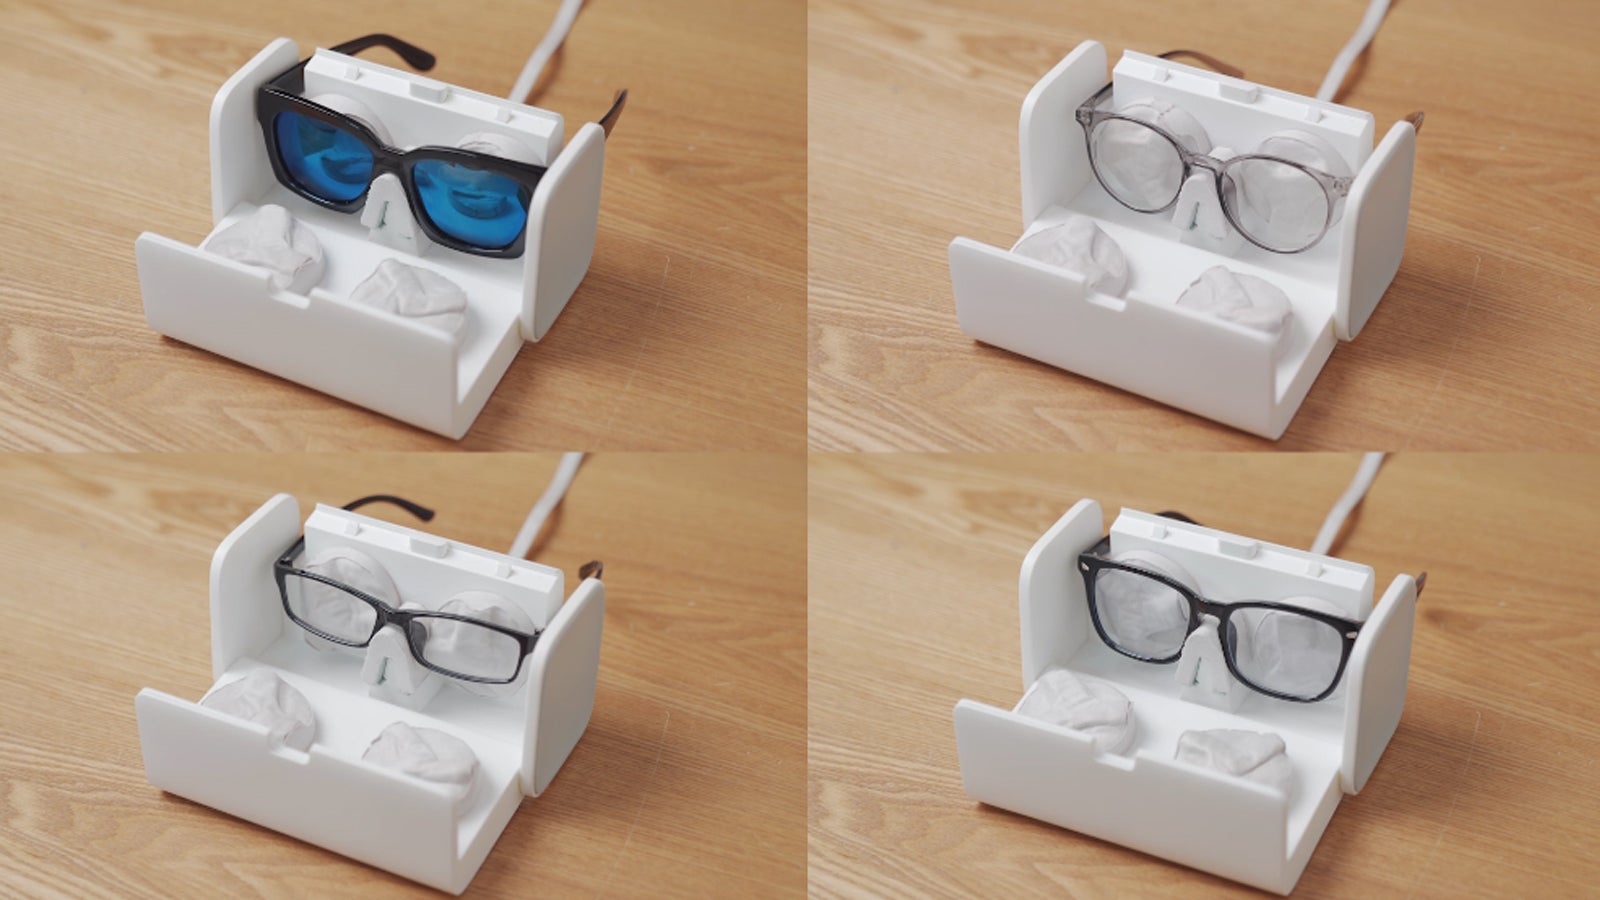 There’s Now a Tiny Washing Machine to Clean Your Grease-Smeared Glasses Too